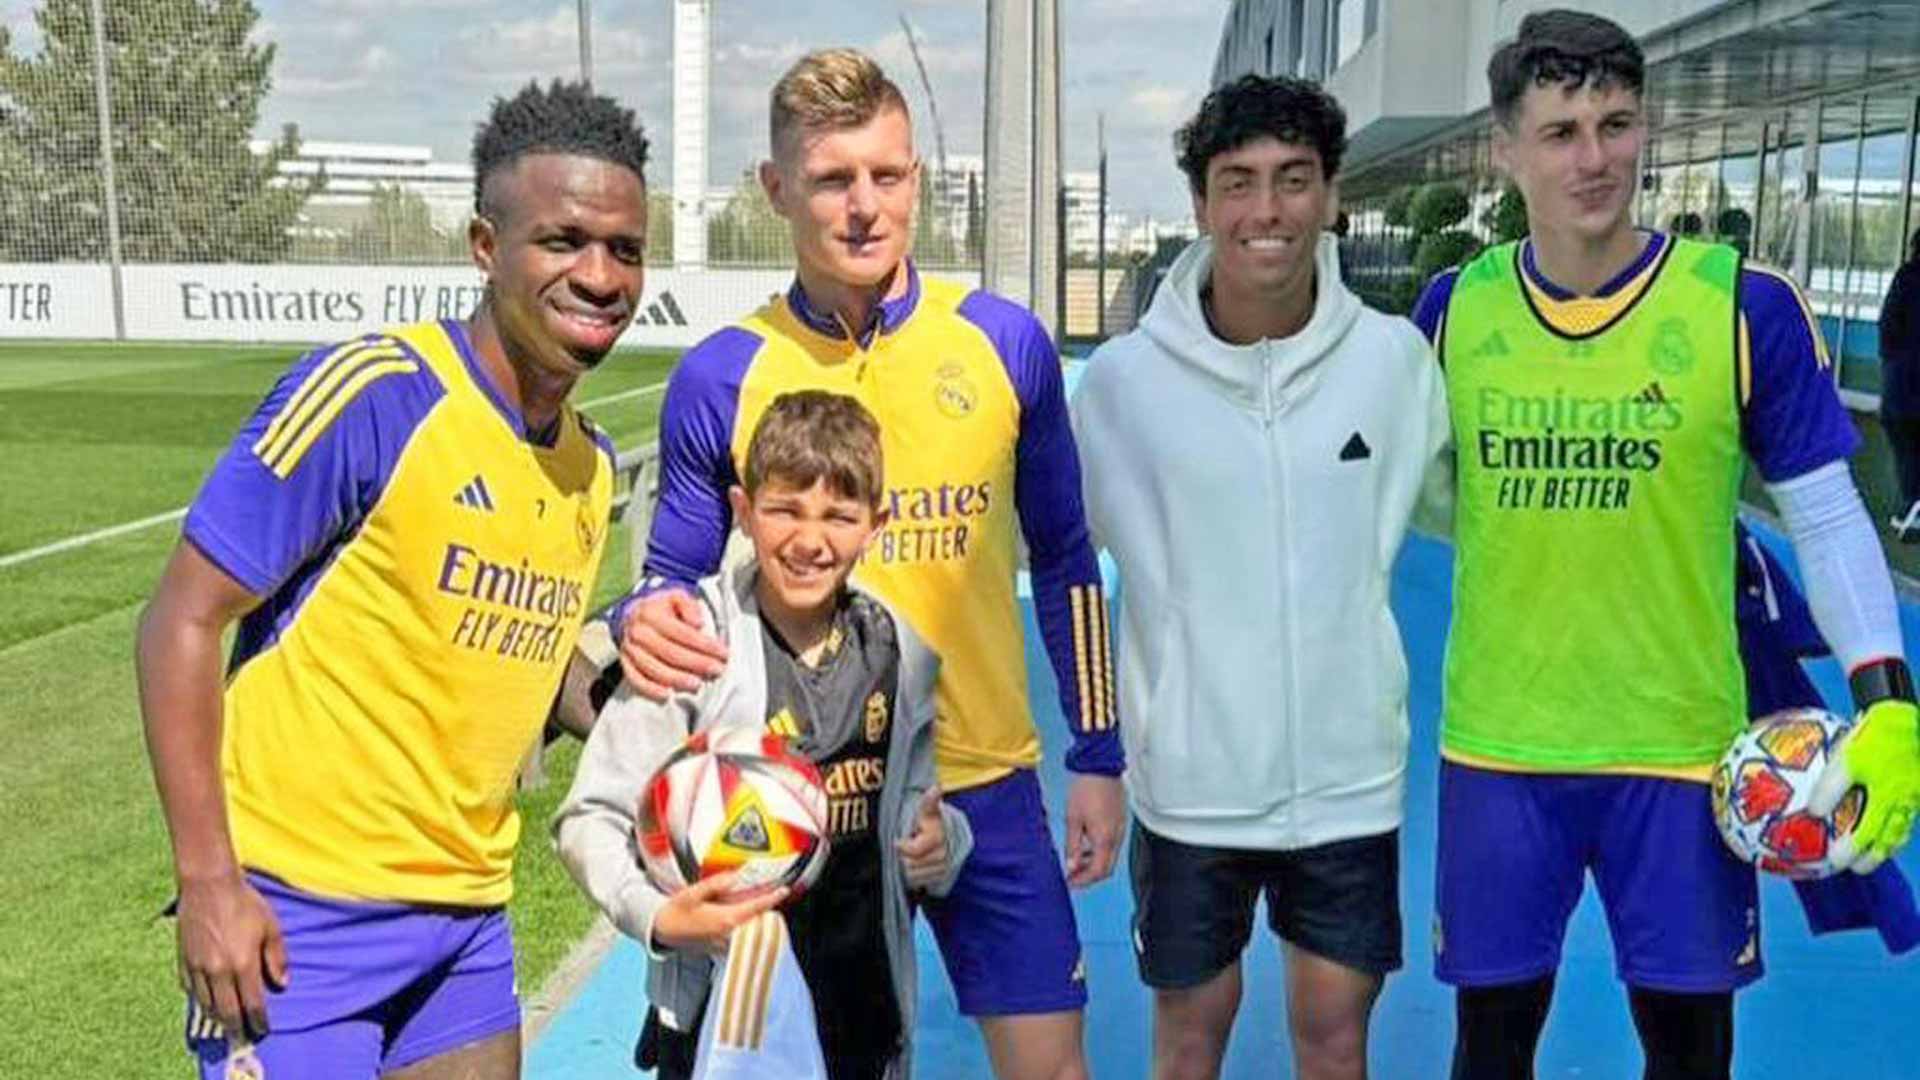 Vini Jr and Toni Kroos are among the players who took the time to meet with <a href='https://www.atptour.com/en/players/abdullah-shelbayh/s0nv/overview'>Abdullah Shelbayh</a>.